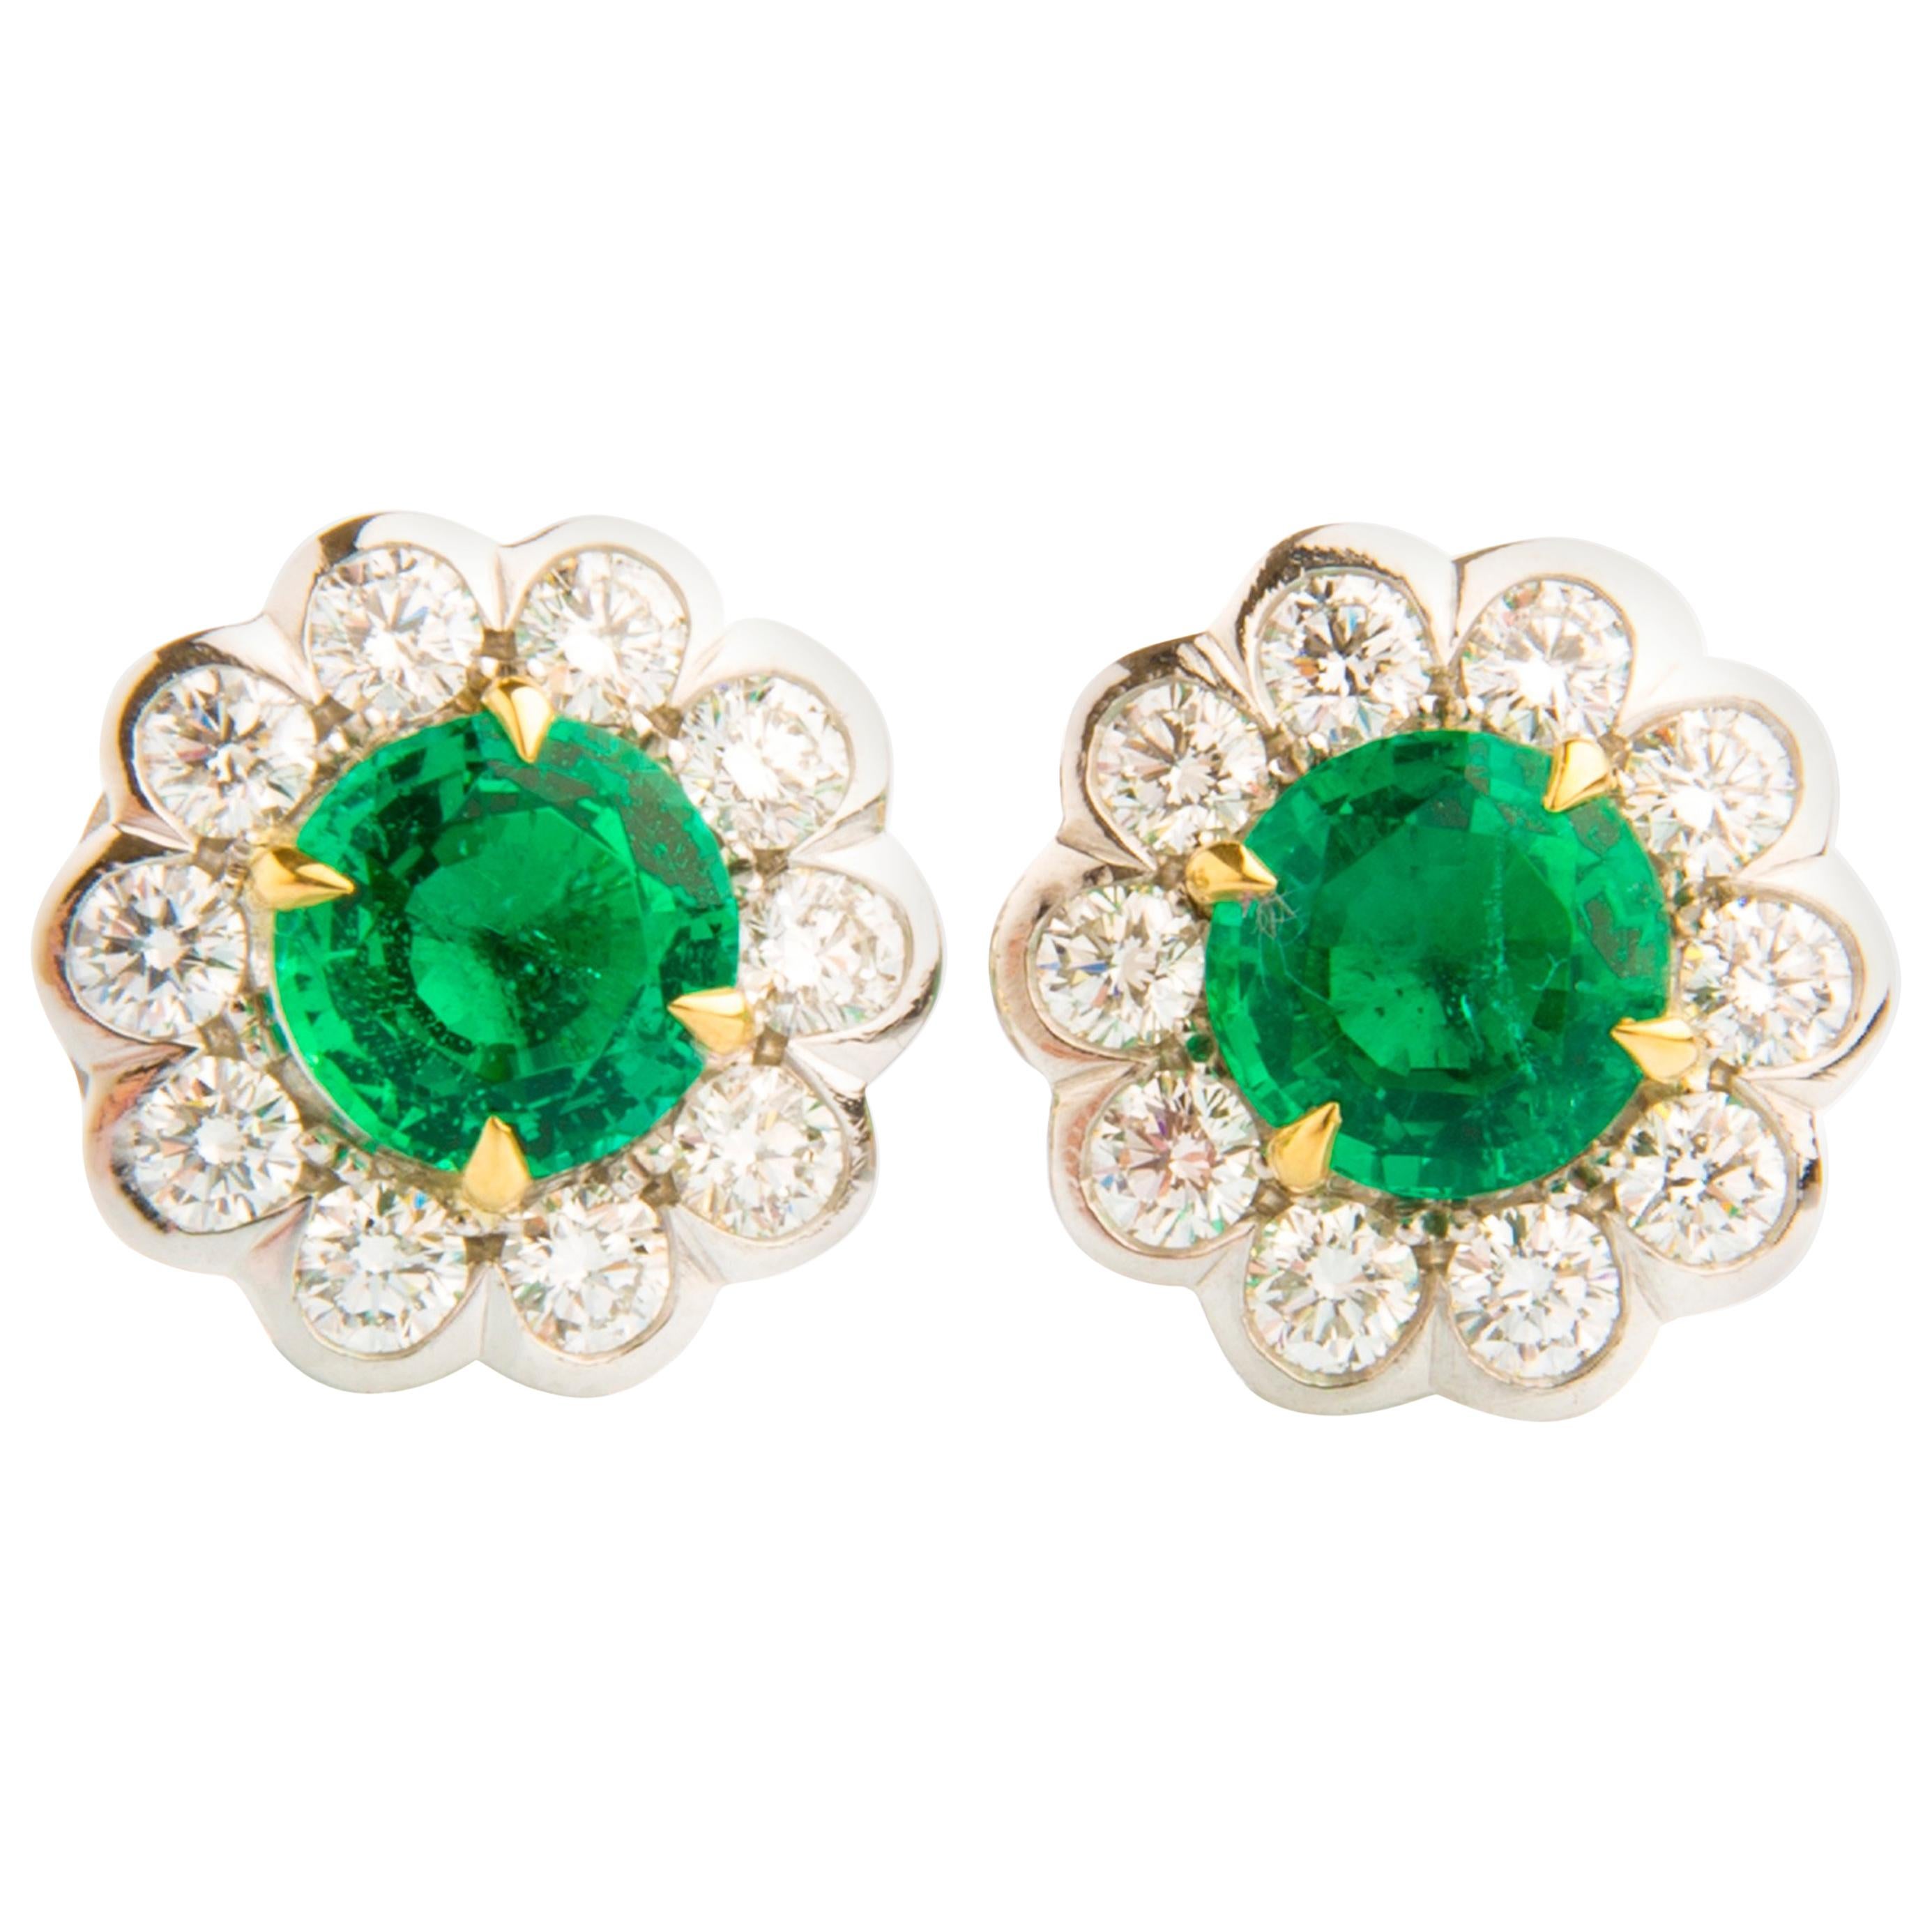 1.83ct Emerald and 1.13ct Diamond Flower Shaped Earrings in 18K White Gold For Sale